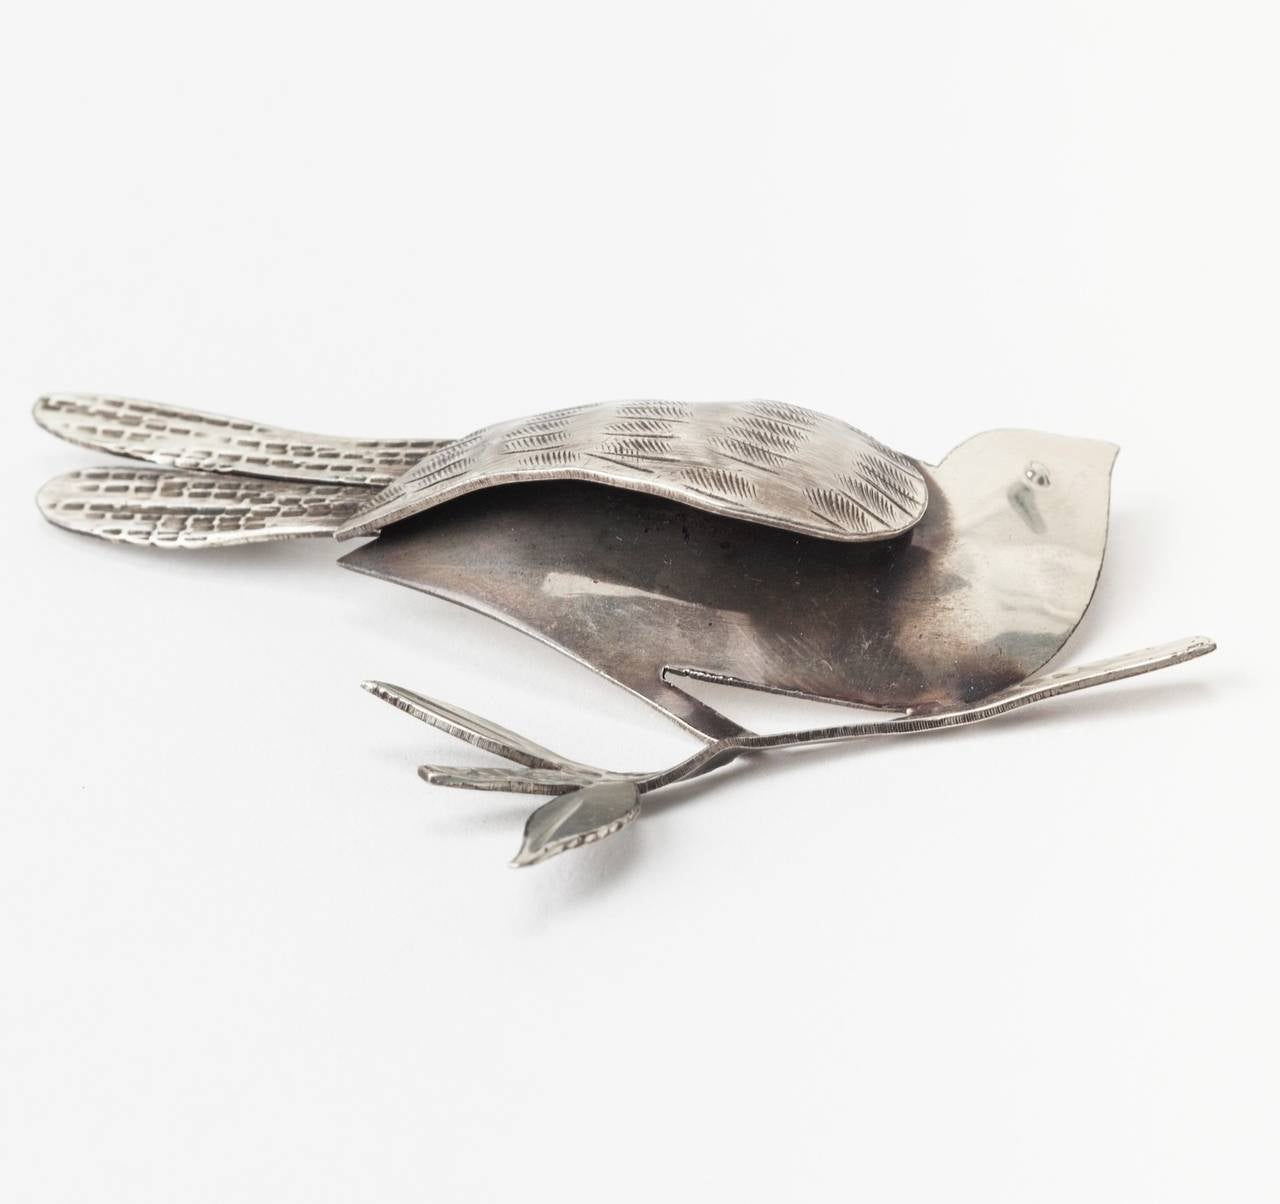 Rebajes Sterling Modernist Bird Brooch made from a single sheet of sterling metal. The wing is cut in one and folded down over body and is then further decorated as is the tail. The bird is perched on a branch cut in one. With a slight bend, and